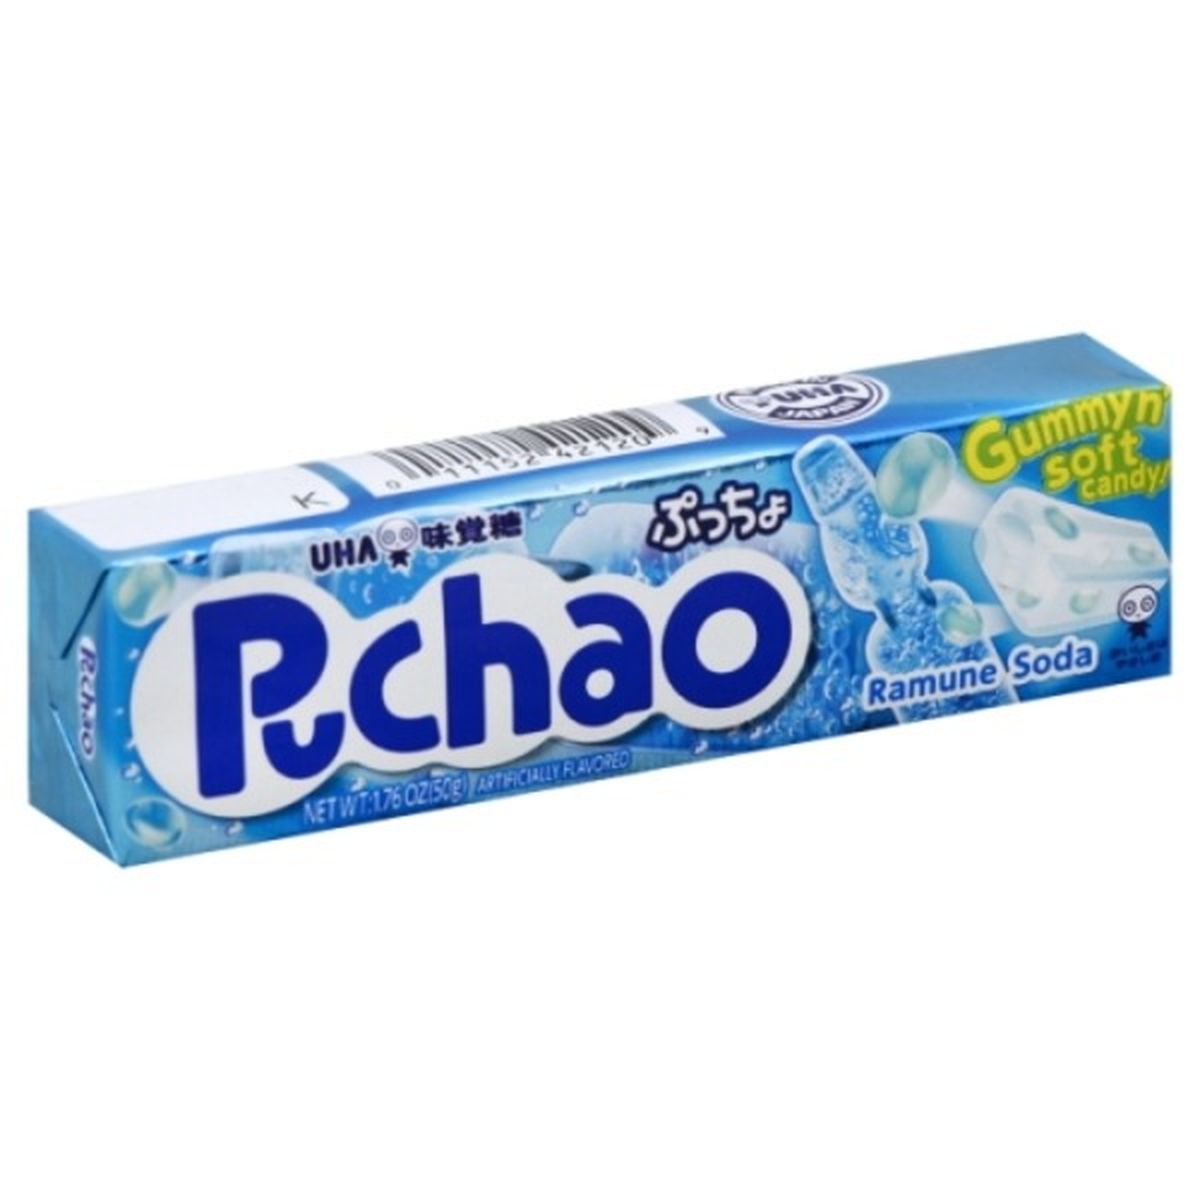 Calories in Puchao Candy!, Gummy n' Soft, Ramune Soda